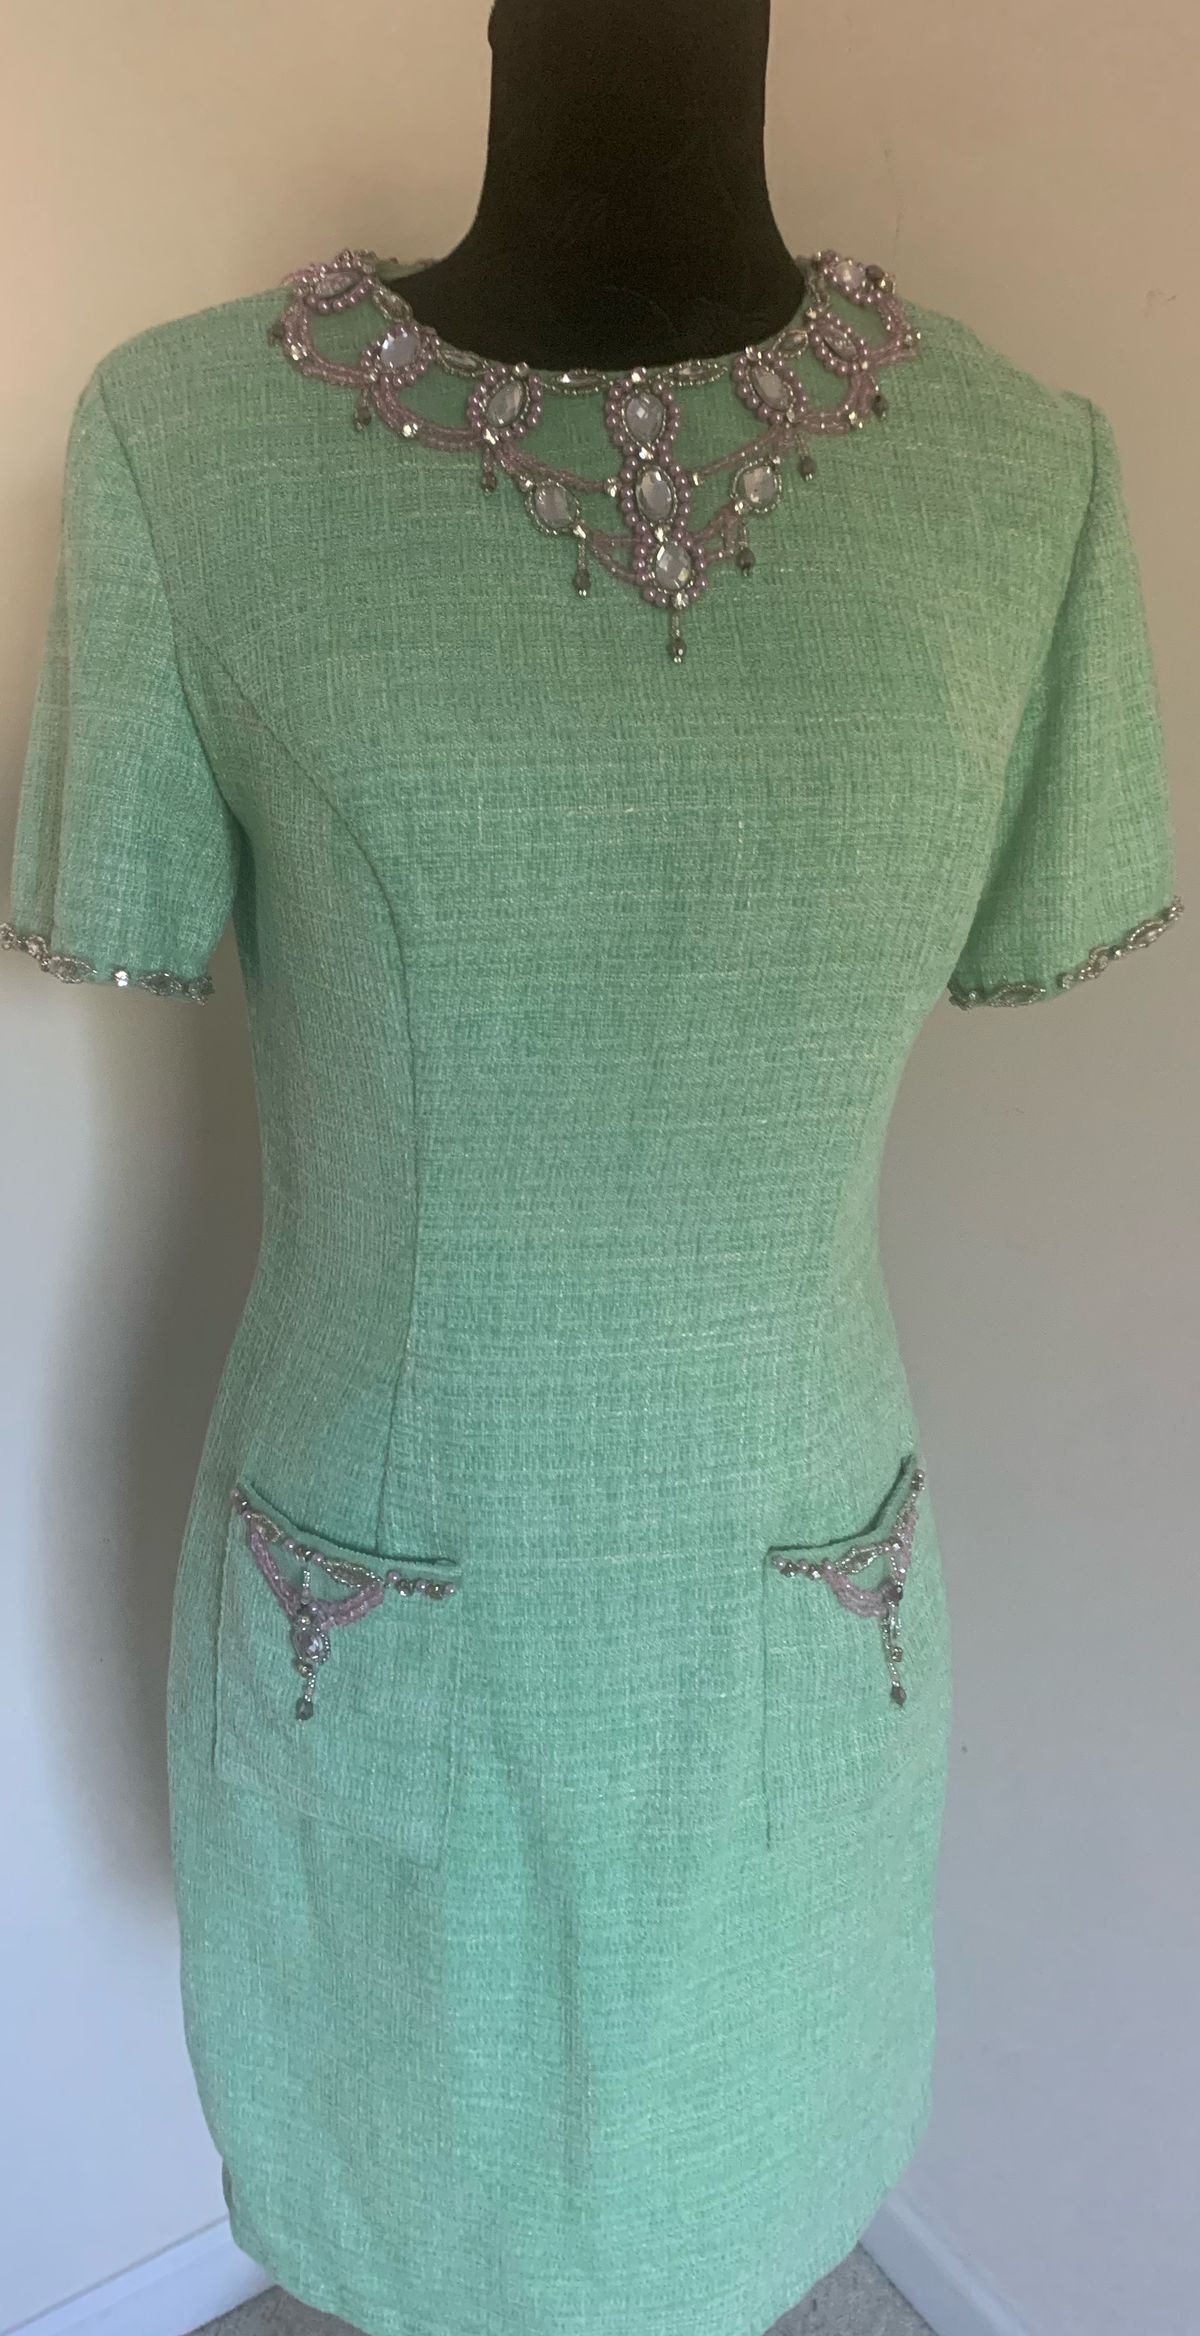 Ashley Lauren Size 6 Homecoming Cap Sleeve Sequined Light Green Cocktail Dress on Queenly